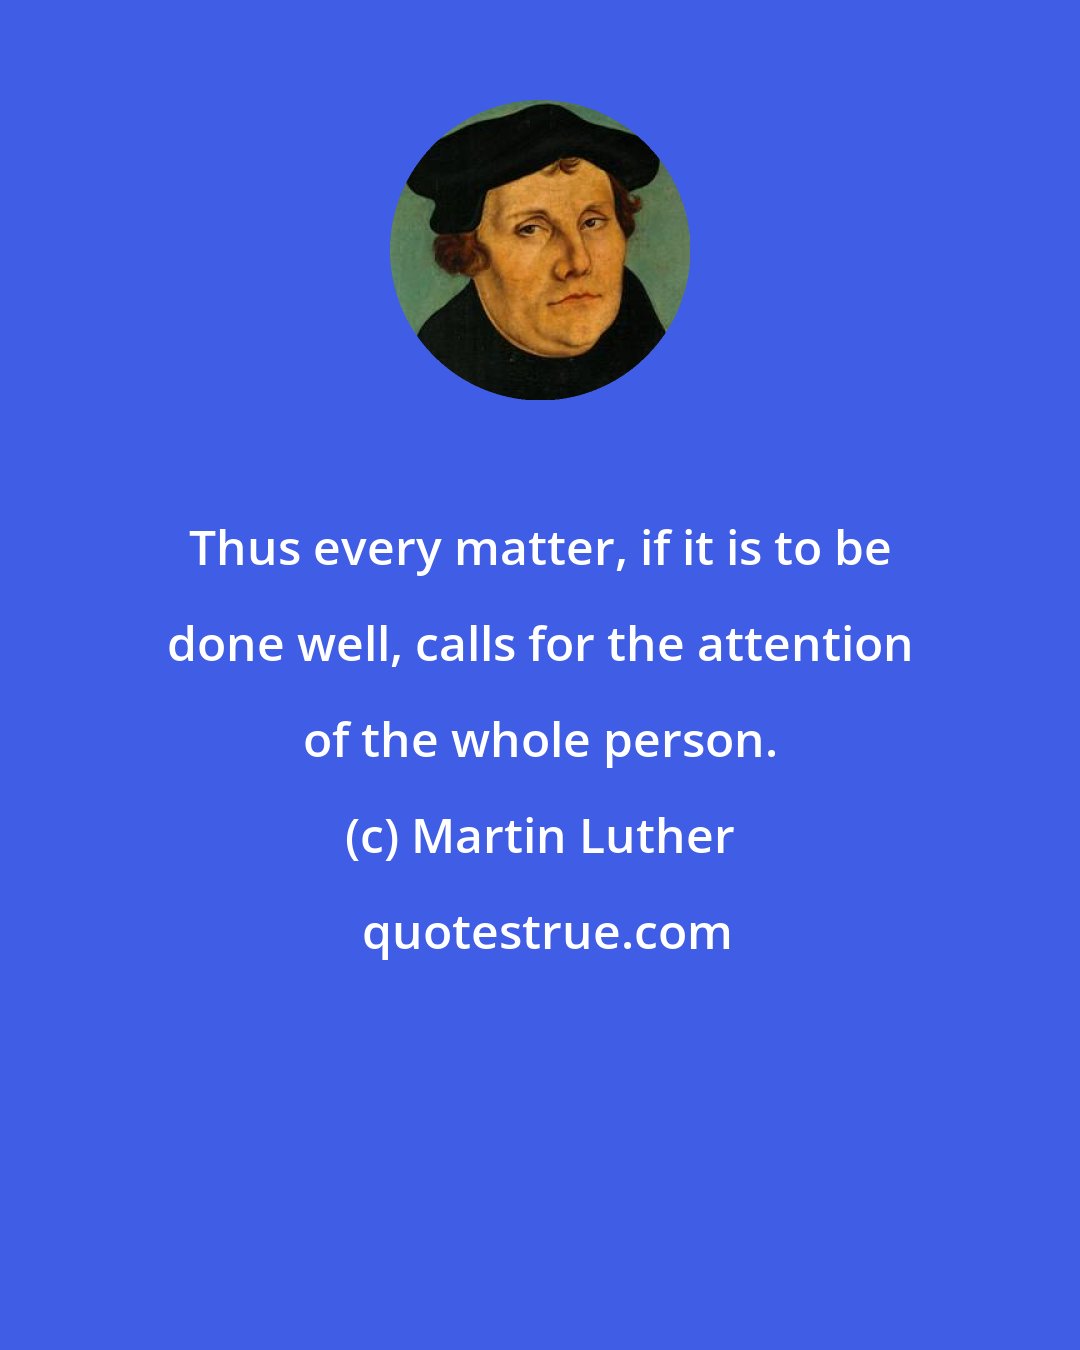 Martin Luther: Thus every matter, if it is to be done well, calls for the attention of the whole person.